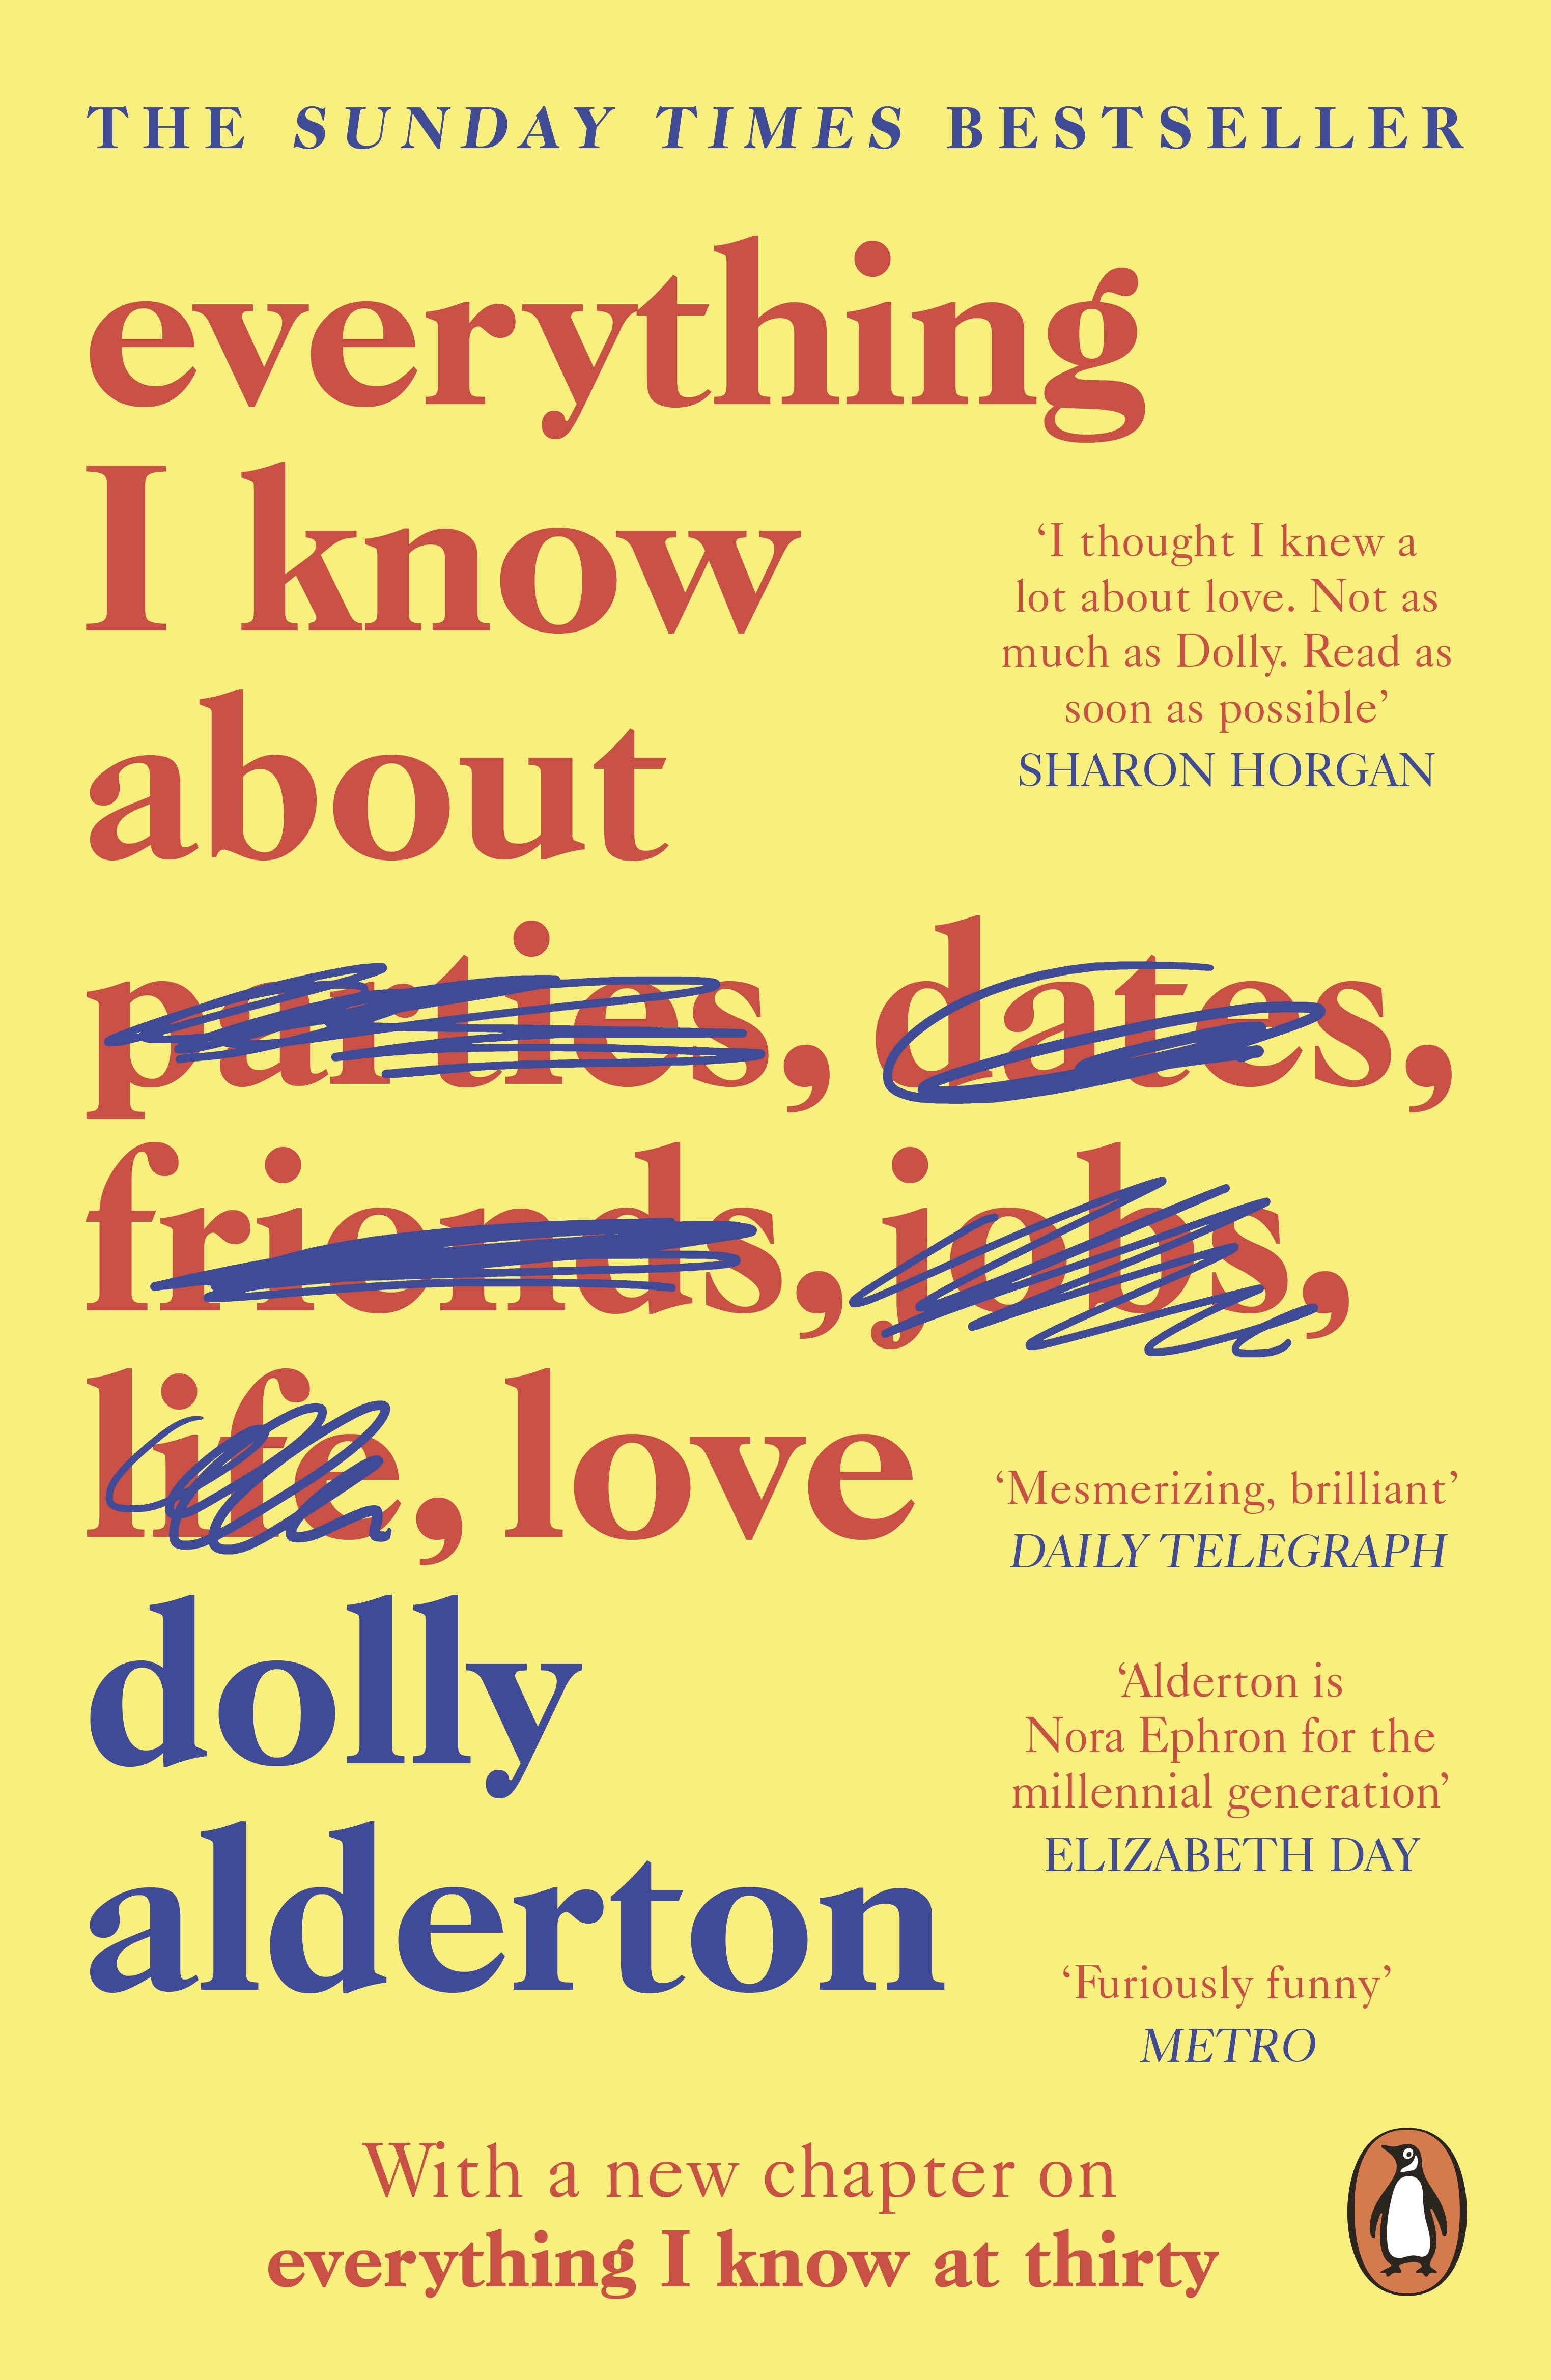 Book “Everything I Know About Love” by Dolly Alderton — February 7, 2019